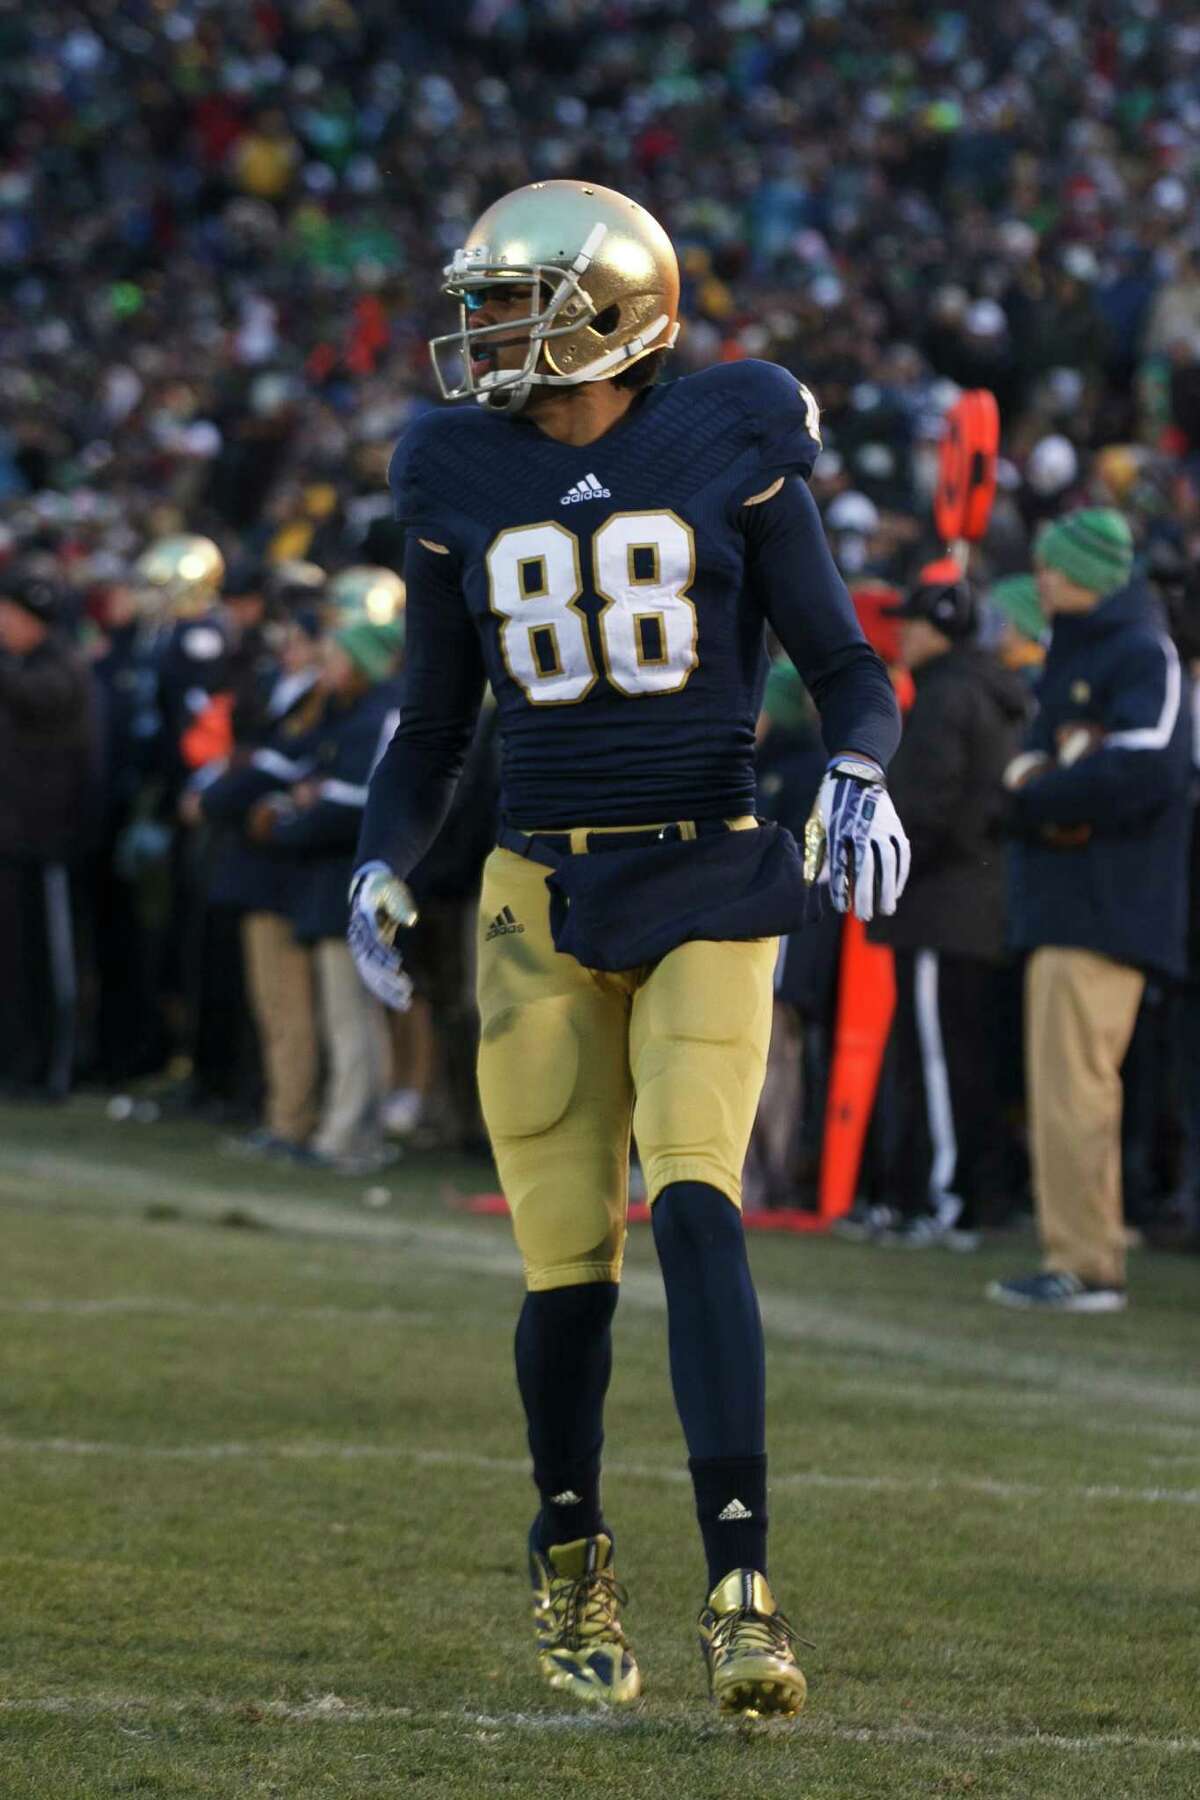 Notre Dame freshman Corey Robinson (88) plays against Brigham Young on Nov. 23, 2013 in South Bend, Ind.